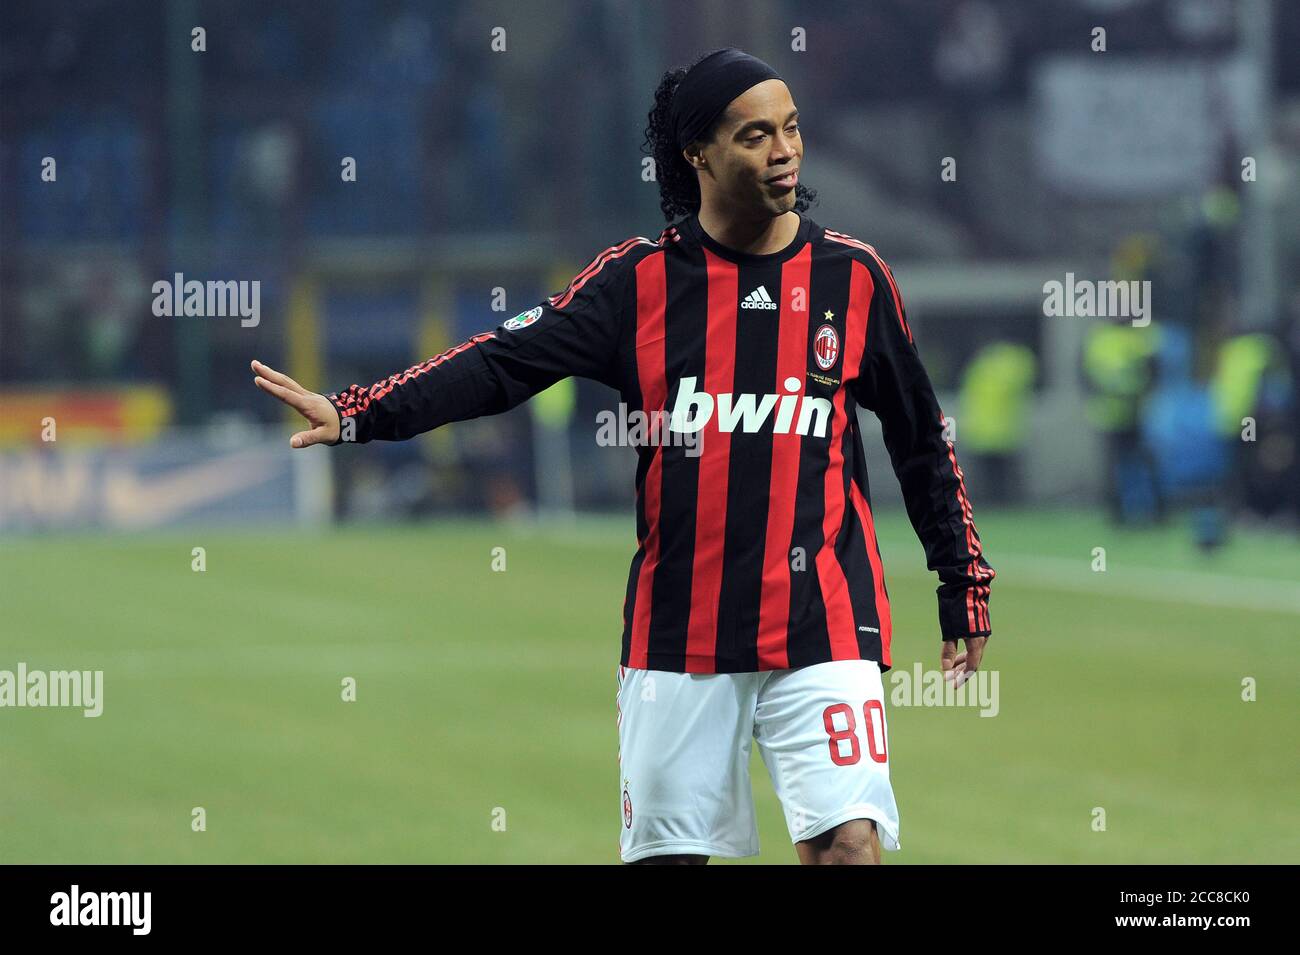 Milan  Italy  15 February 2009, 'G.MEAZZA SAN SIRO ' Stadium, Serious Football Championship A 2008/2009, FC Inter - AC Milan : Ronaldinho in action during the match Stock Photo